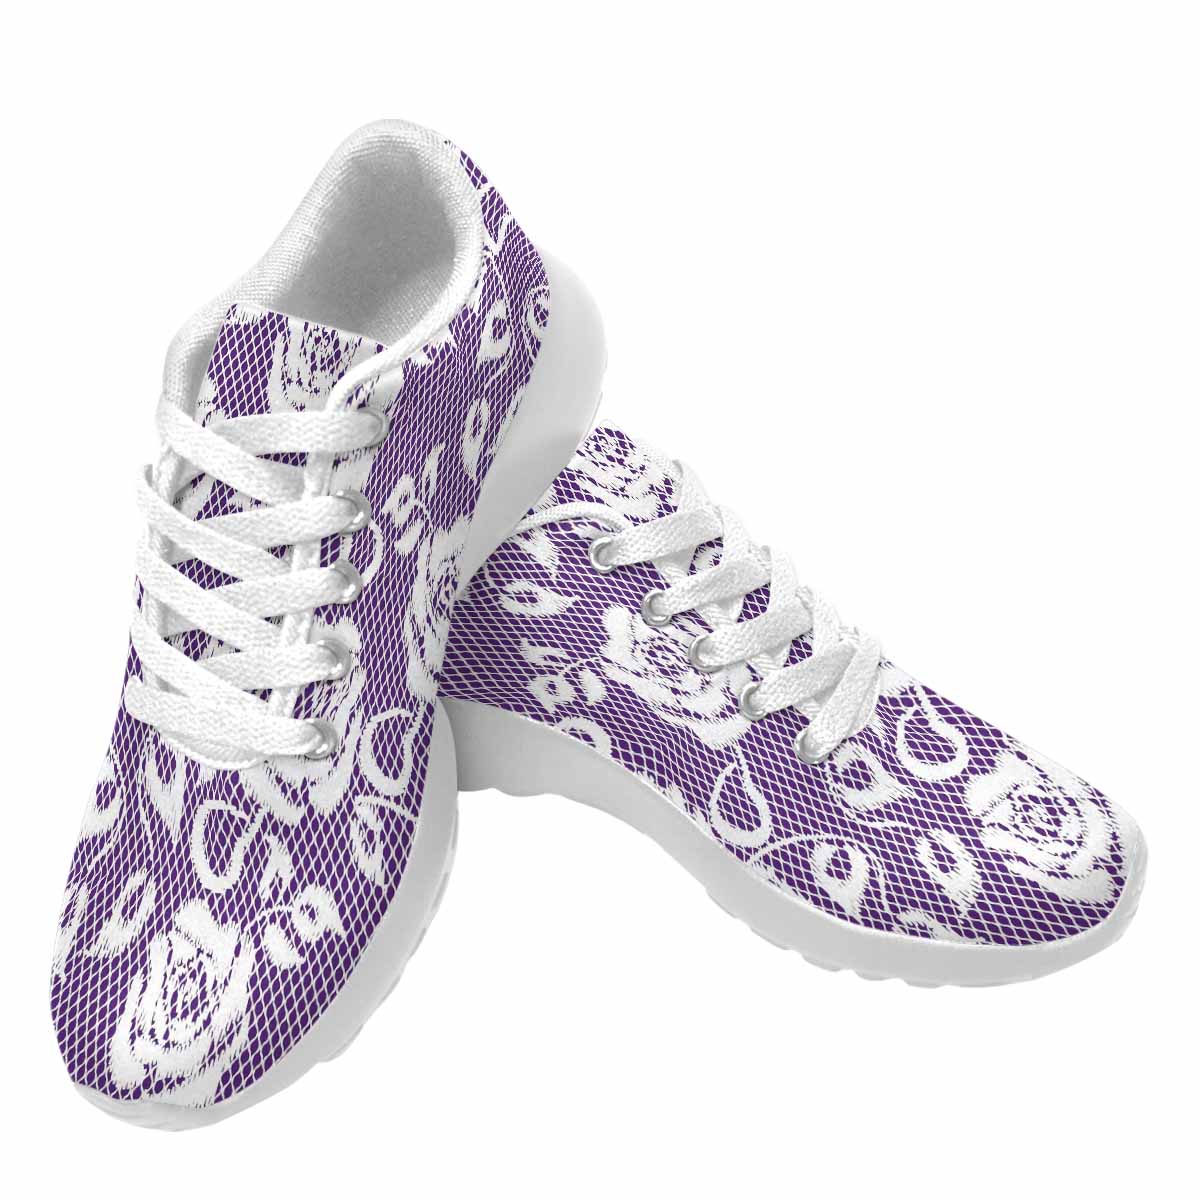 Victorian lace print, womens cute casual or running sneakers, design 18